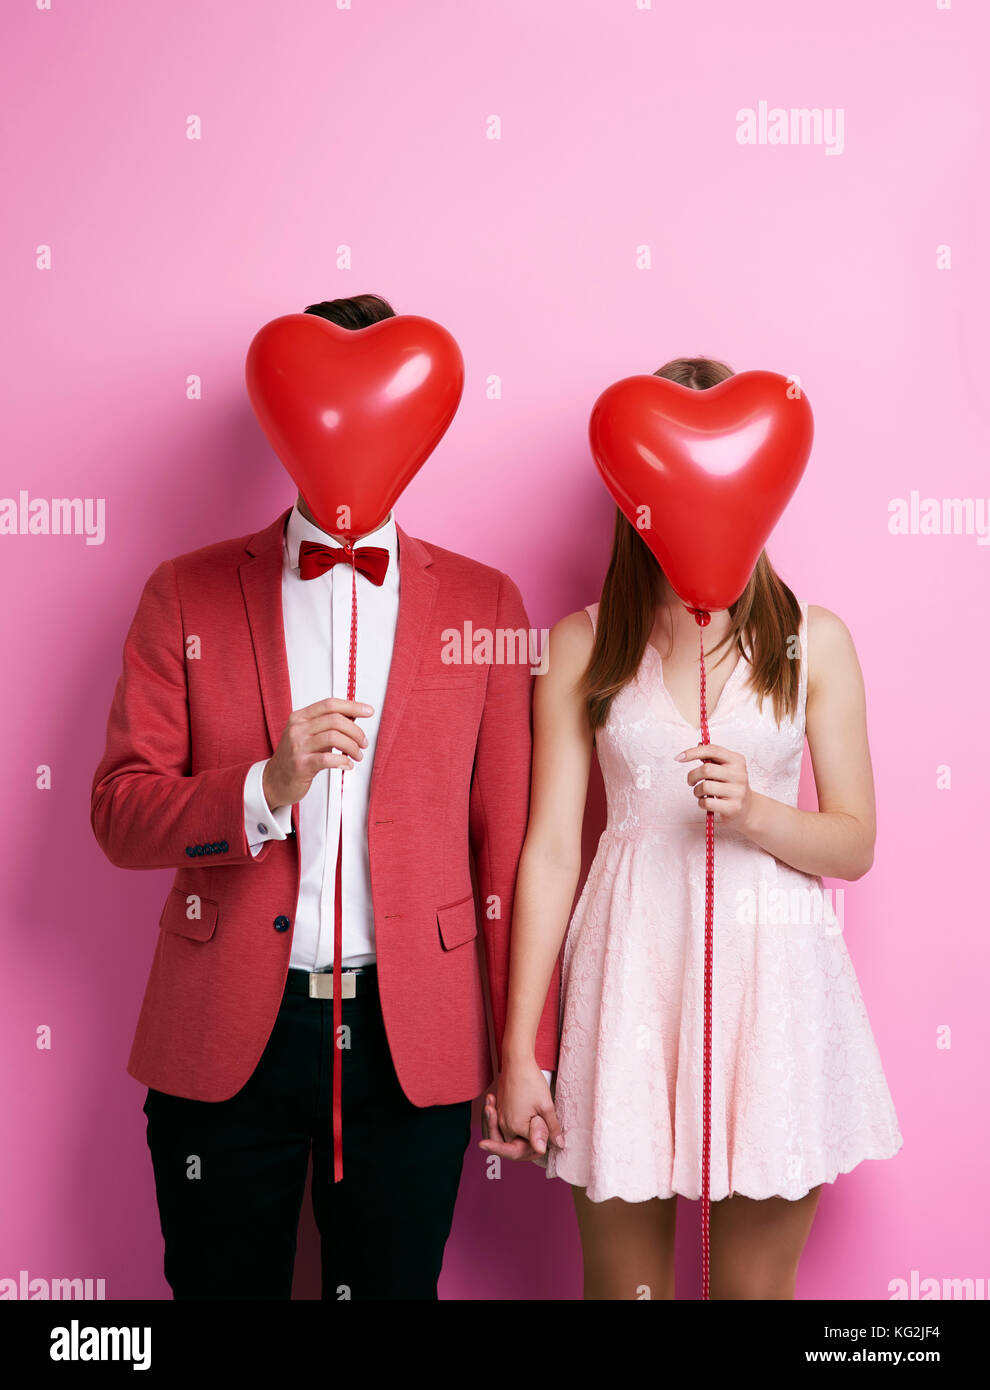 Unrecognizable couple with balloon holding hands Stock Photo